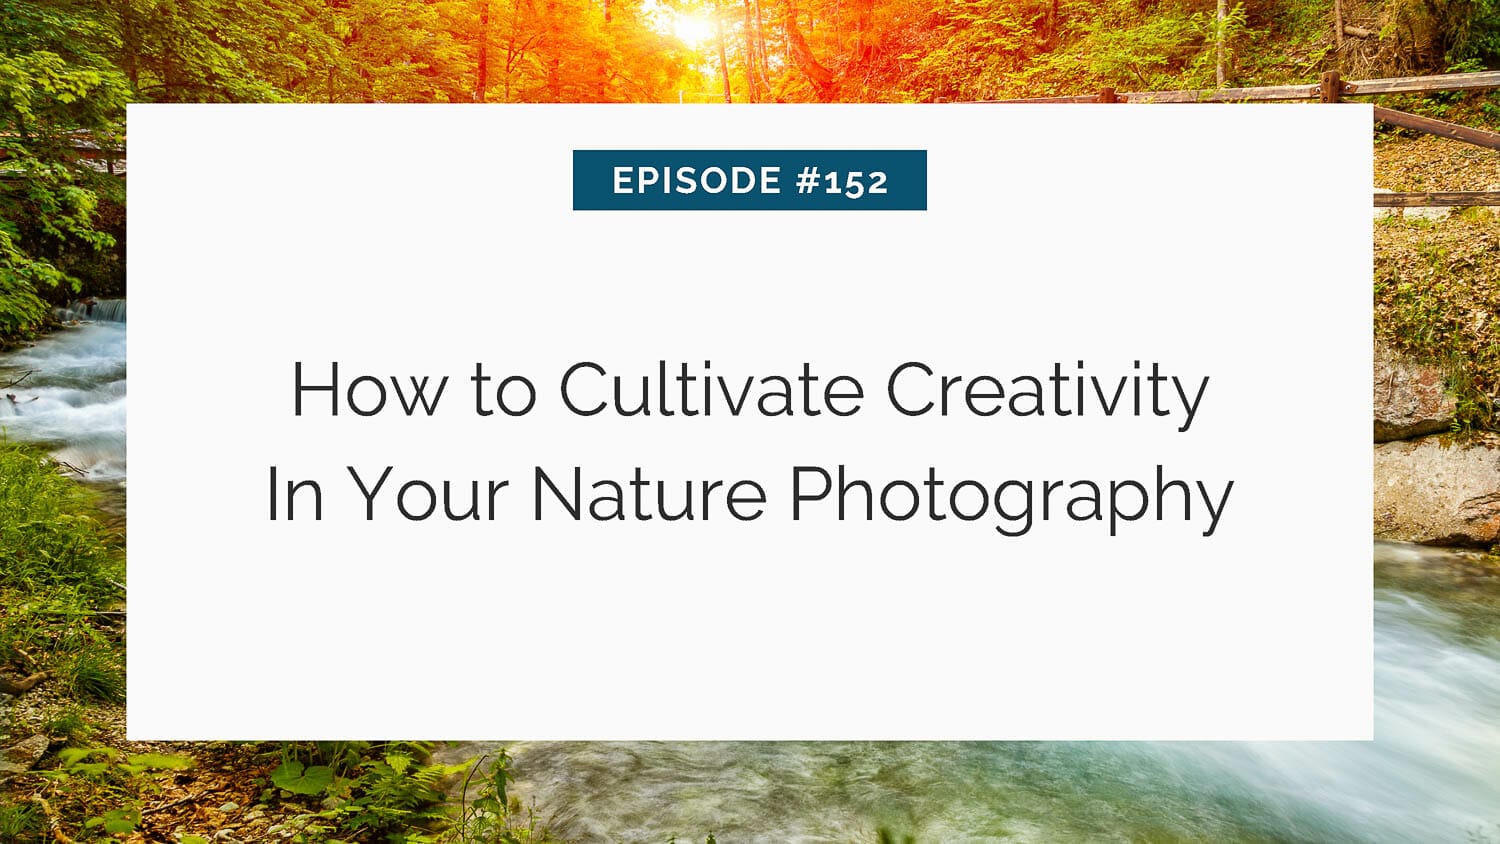 Podcast episode title on nature photography against a forest stream backdrop.